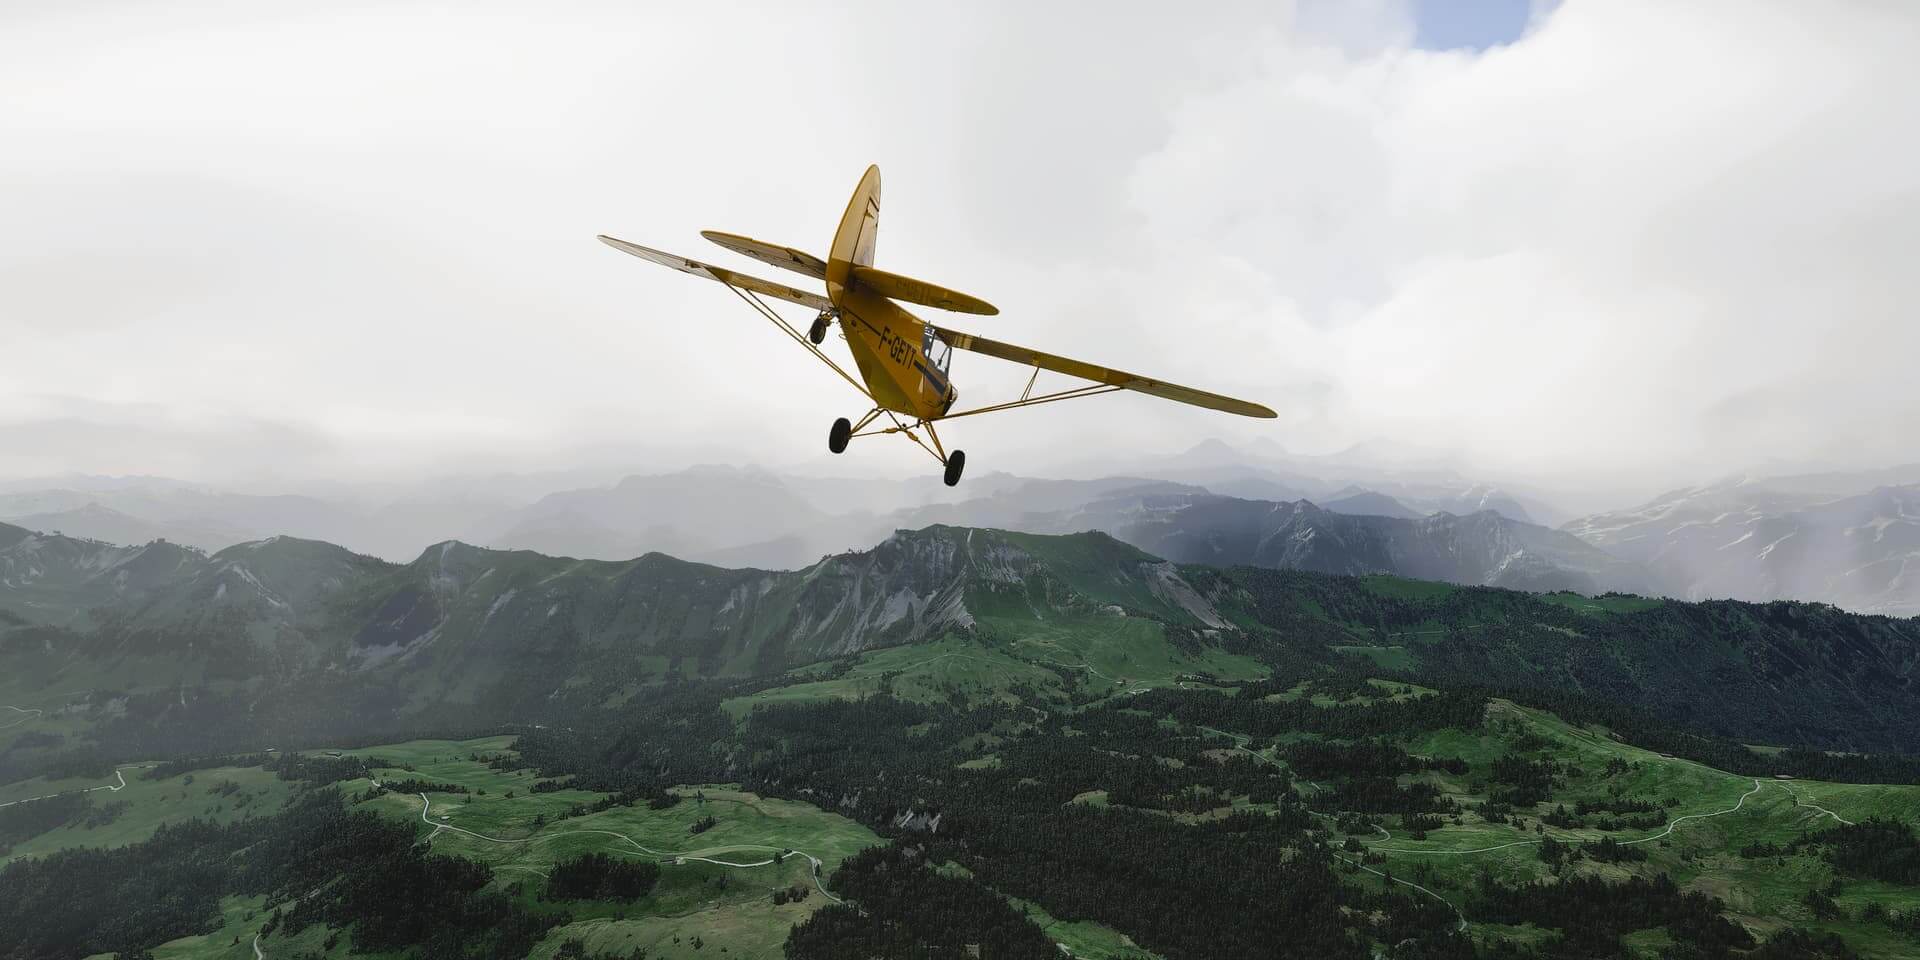 A yellow propeller aircraft flies towards a green mountain range, with limited visibility ahead due to a low cloud base